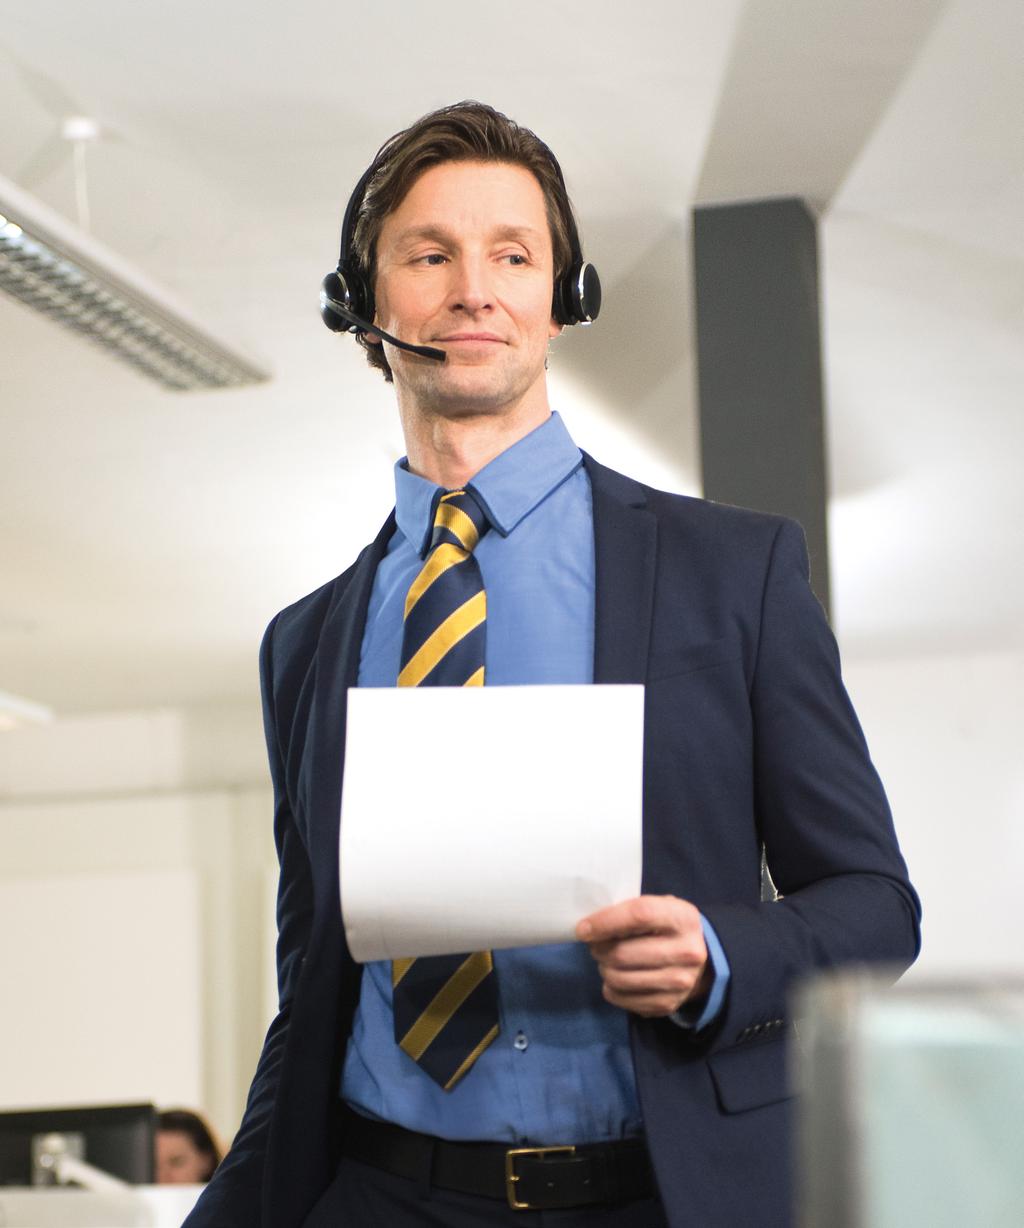 Try us Jabra offers a free on-site trial program for eligible customers, enabling you to